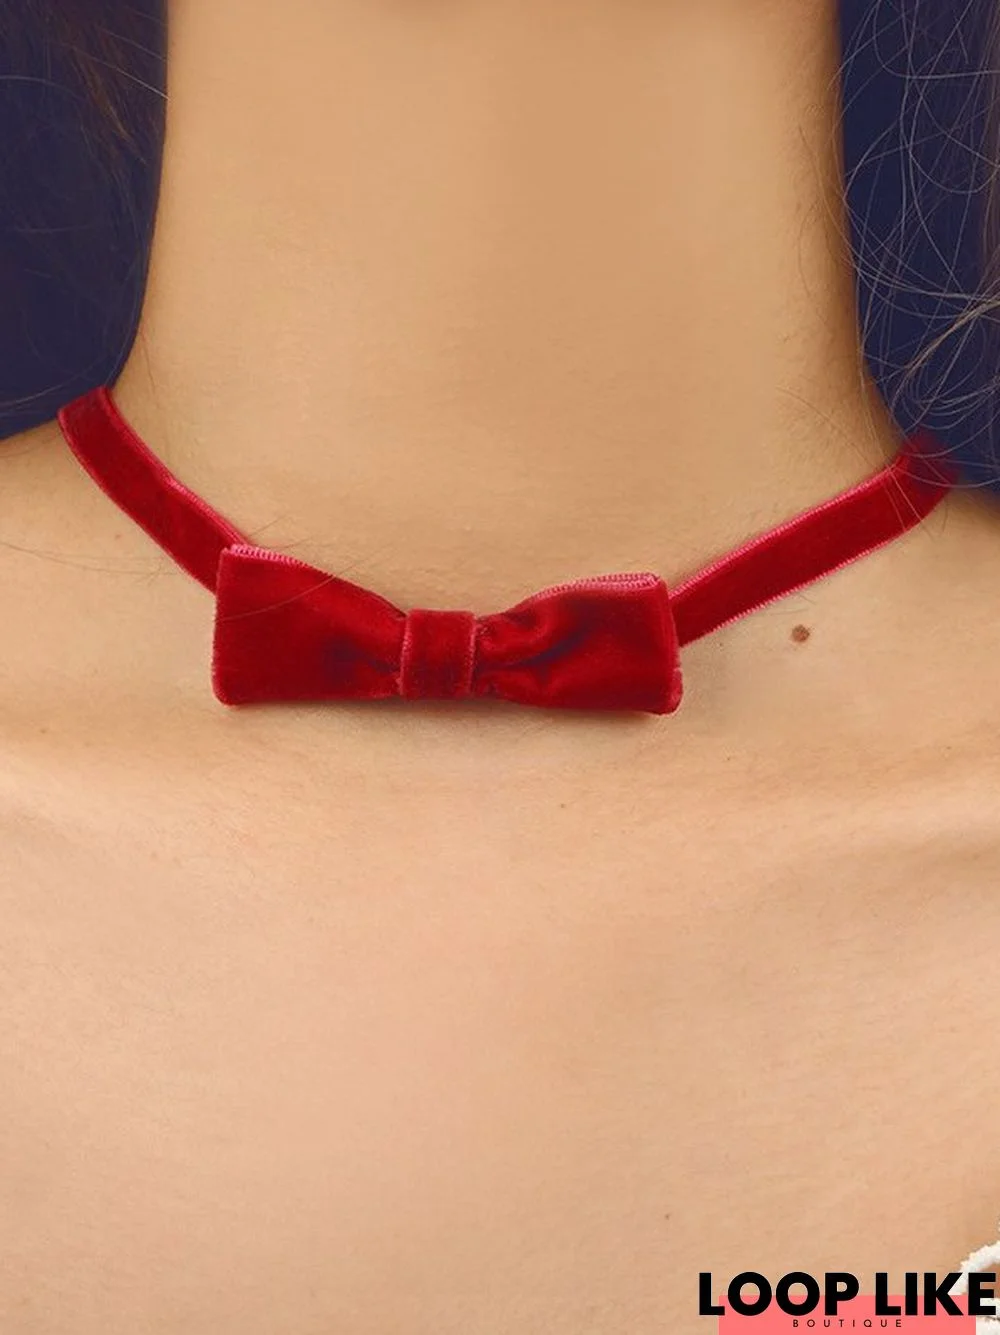 Red Velvet Bow Necklace Christmas New Year Valentine's Day Jewelry Gifts For Her